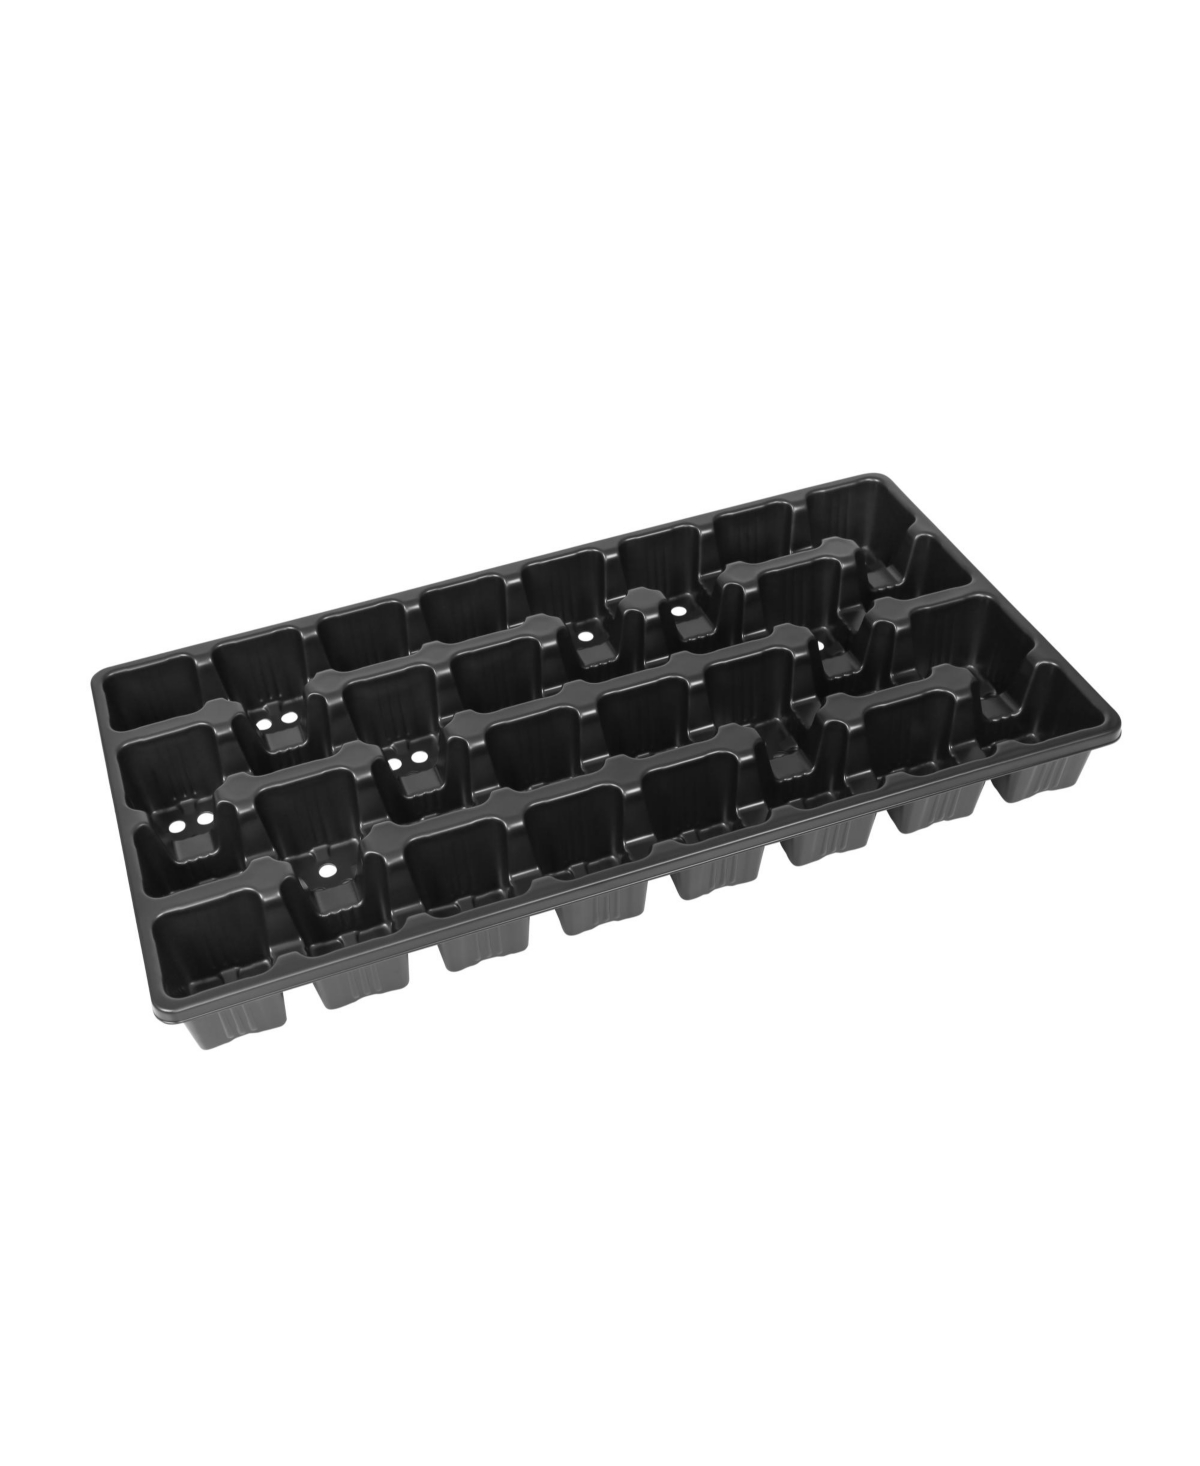 22 x 10.5in Heavy Duty 32 Cell Carrying Tray, Black - Black